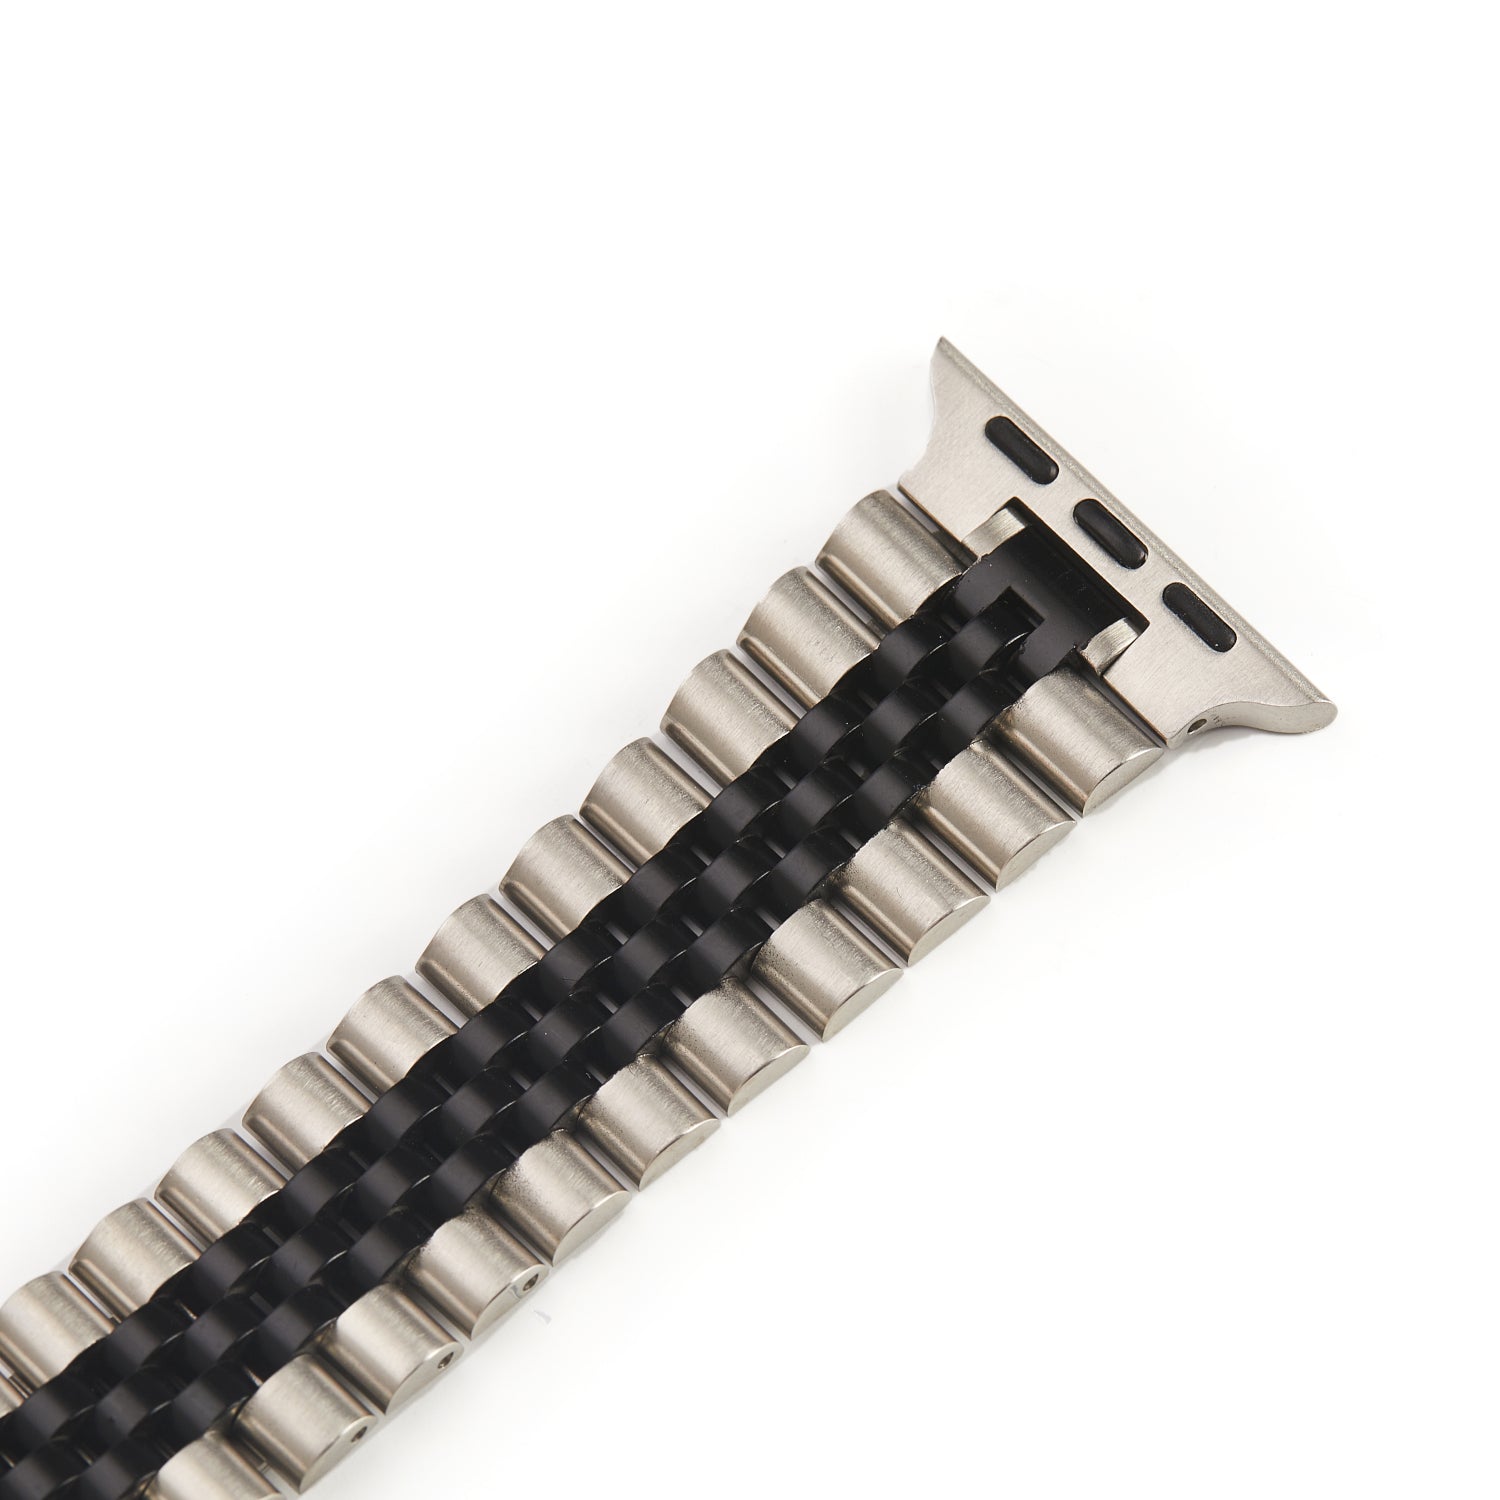 Stainless Steel Link Bracelet Band - The Perth in Silver and Black - Compatible with Apple Watch Size 42mm to 45mm - Friendie Pty Ltd